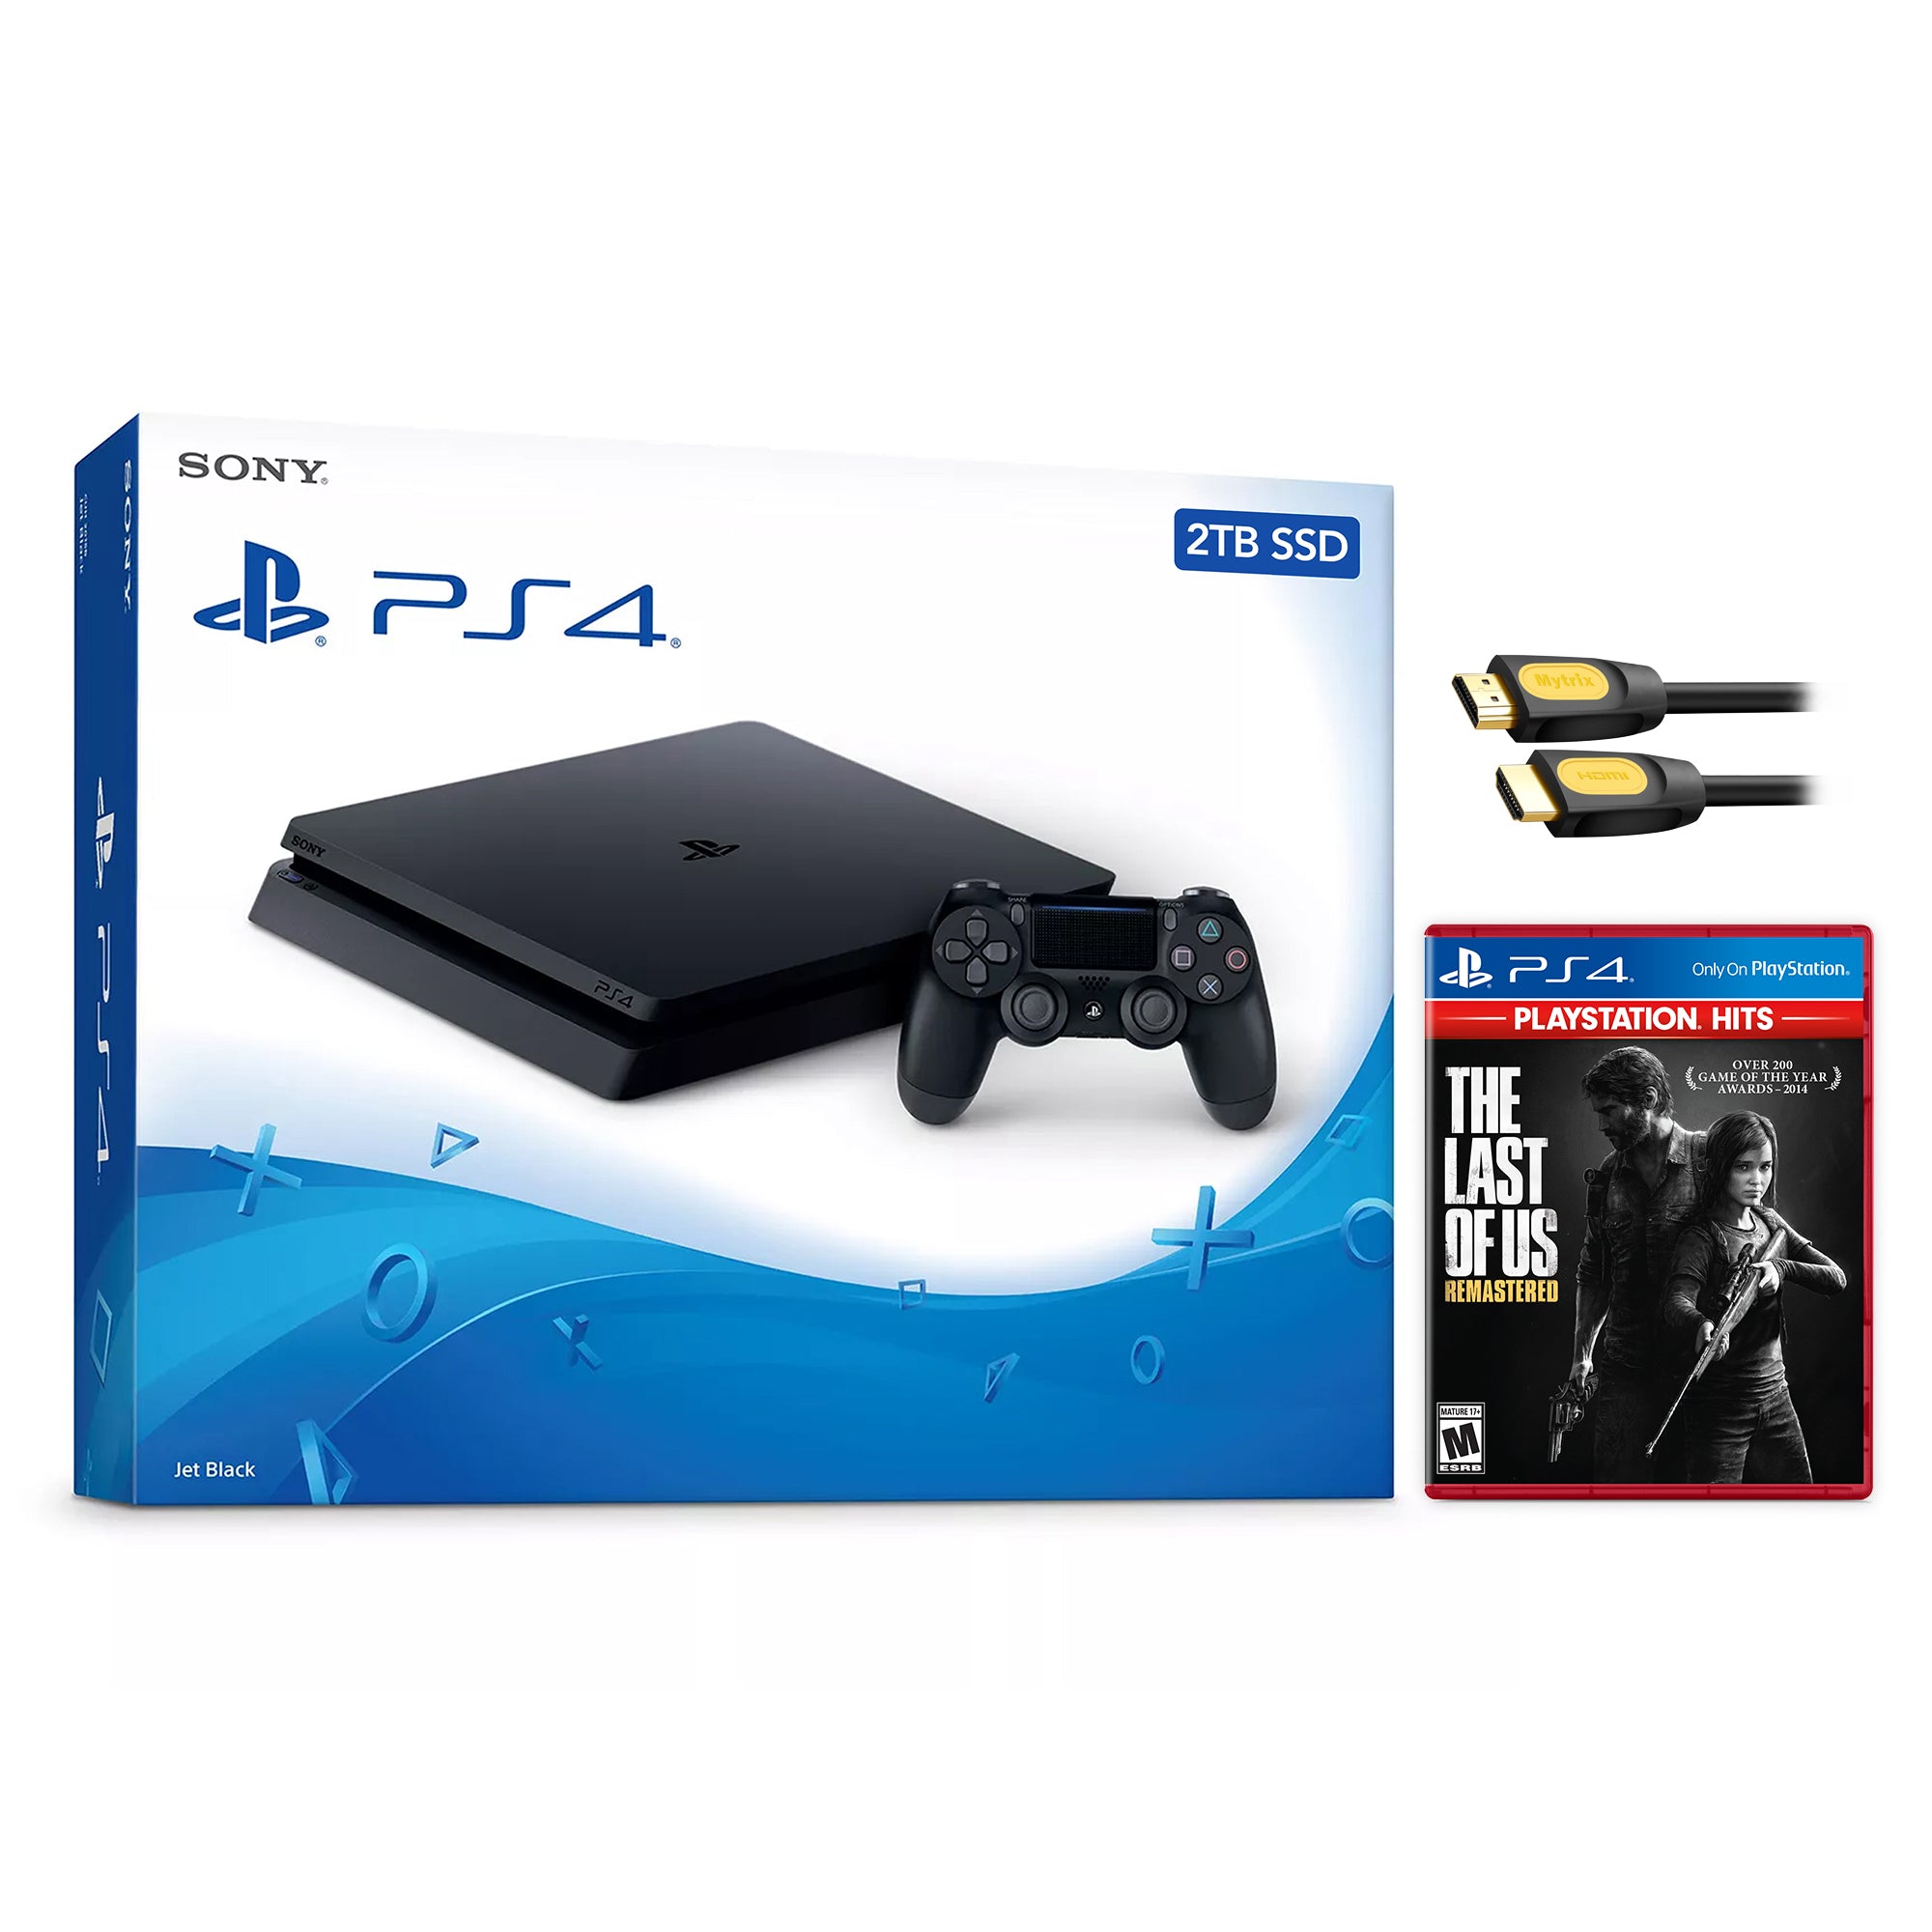 Sony PlayStation 4 Slim Call of Duty Modern Warfare II Bundle Upgrade 2TB SSD PS4 Gaming Console, Jet Black, with Mytrix High Speed HDMI - 2TB Internal Fast Solid State Drive Enhanced PS4 Console